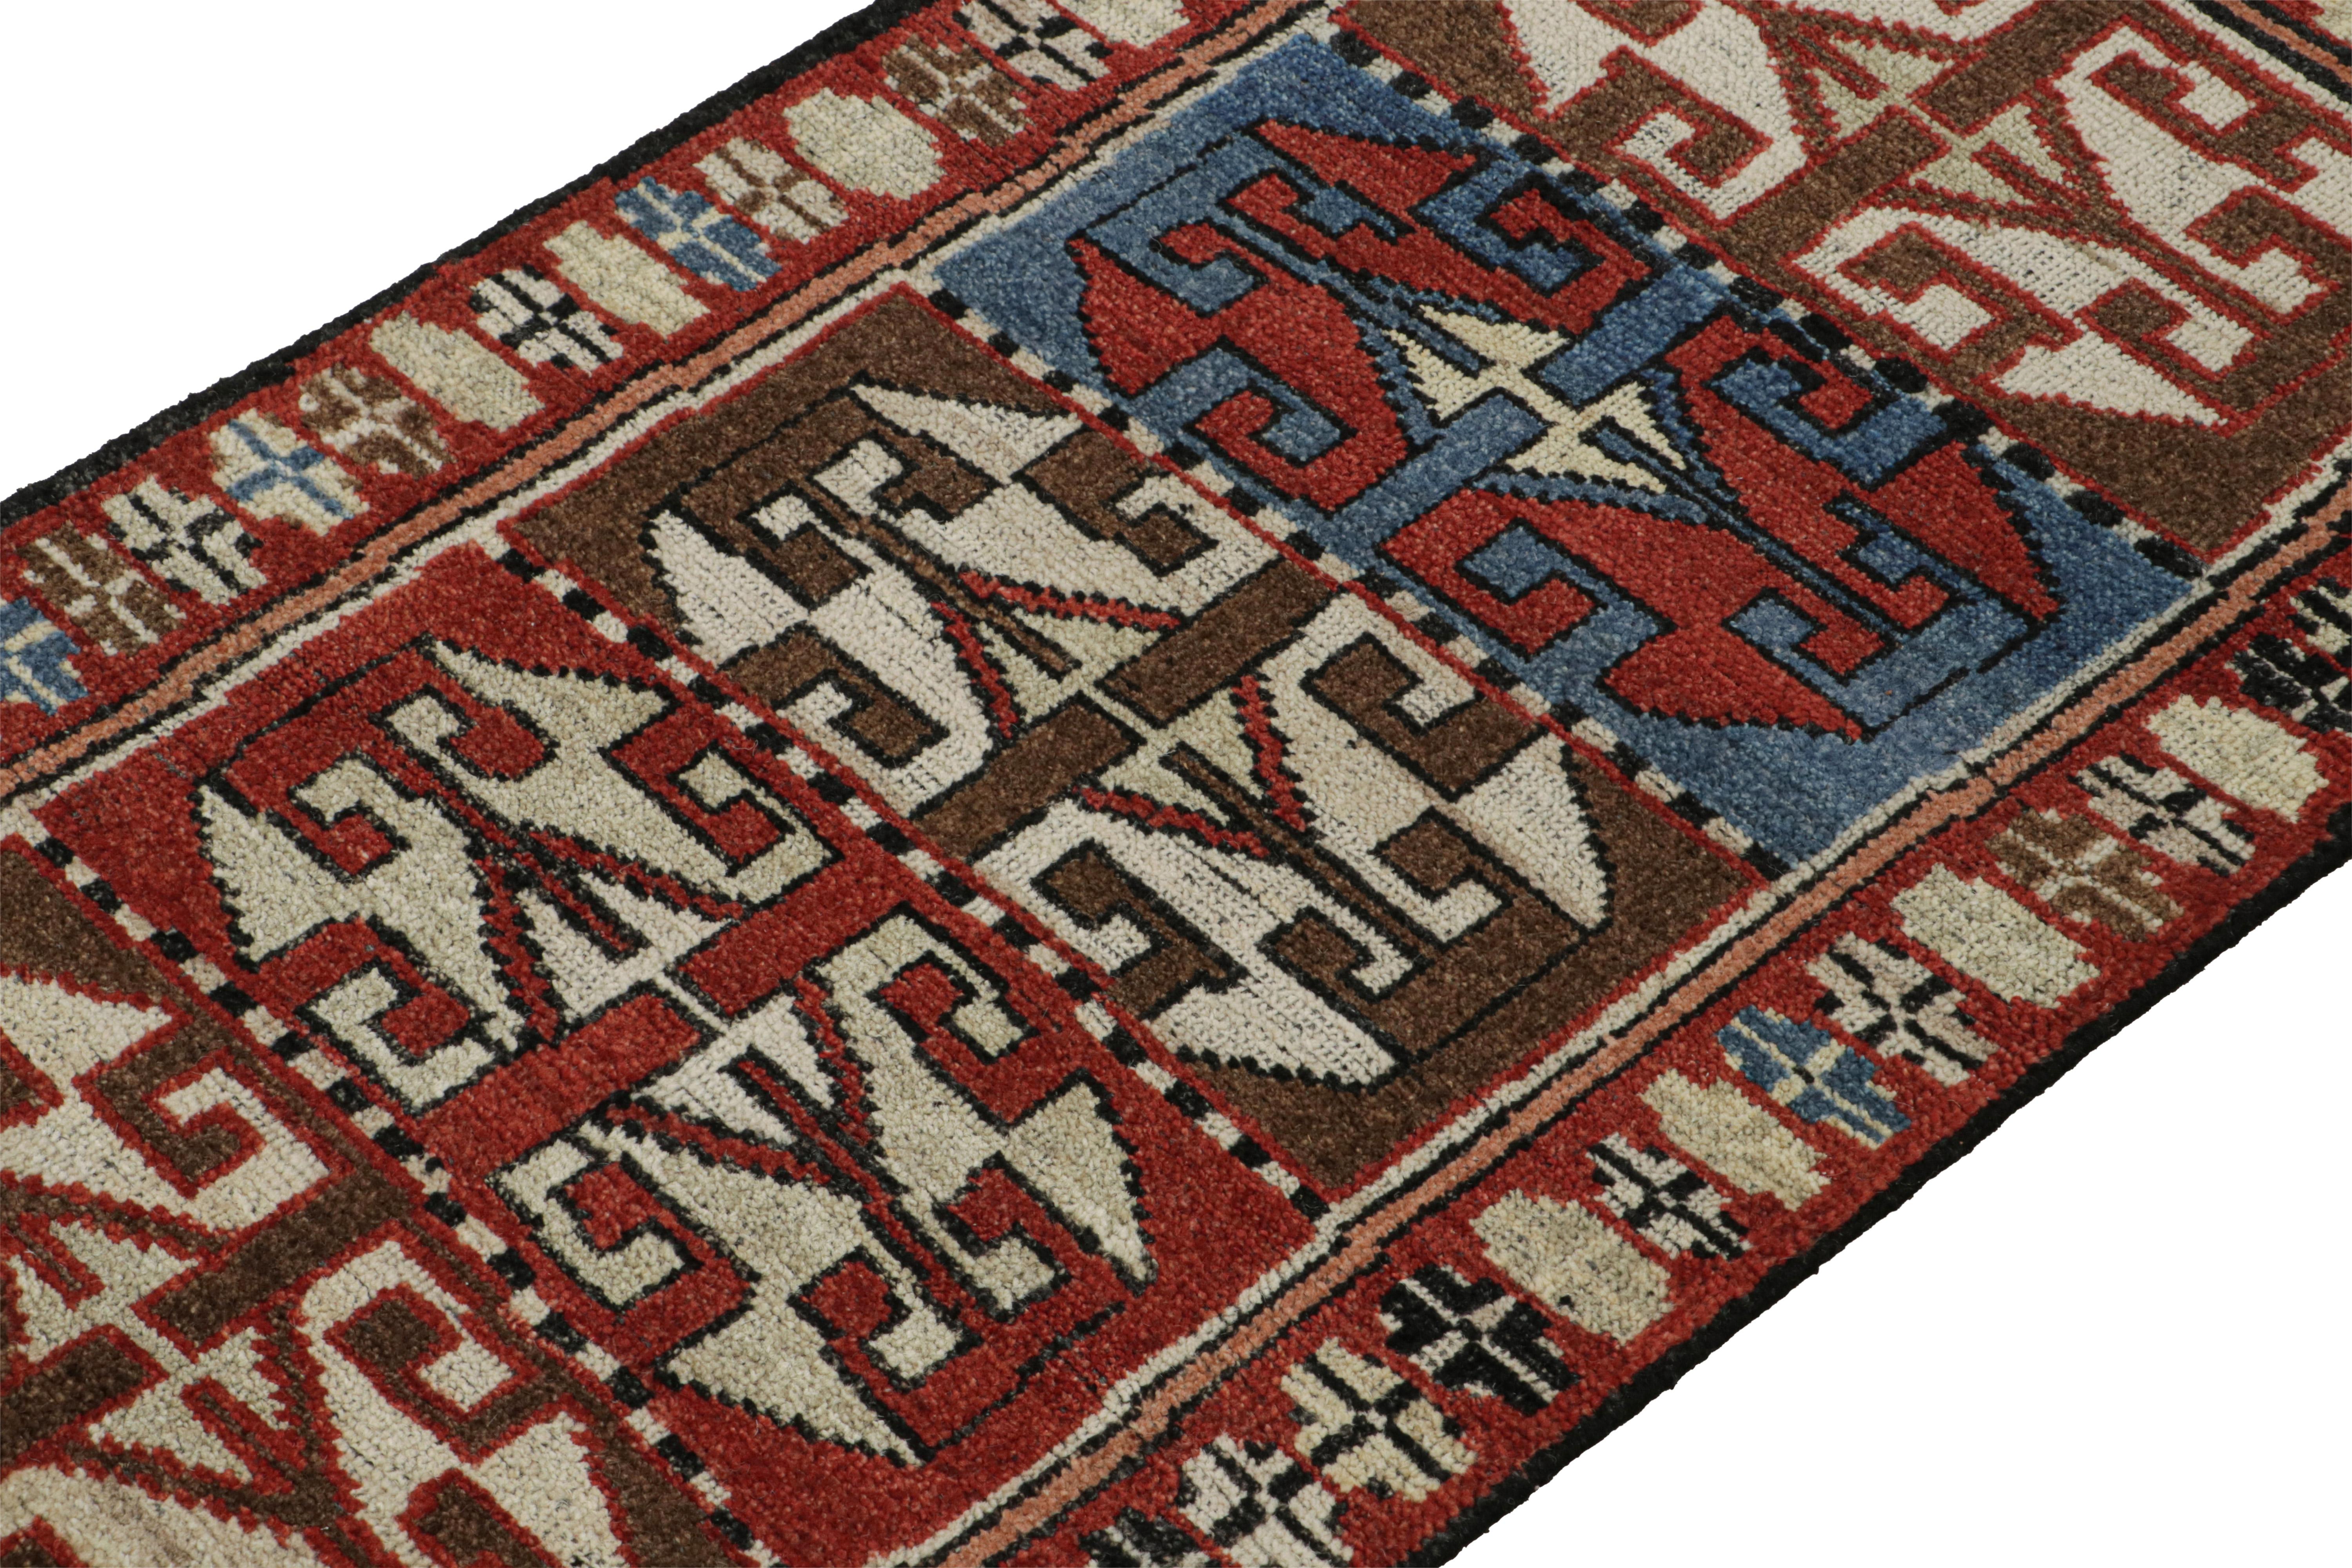 Hand-Knotted Rug & Kilim’s Antique Tribal Style Rug in Red, Blue & Brown Patterns For Sale